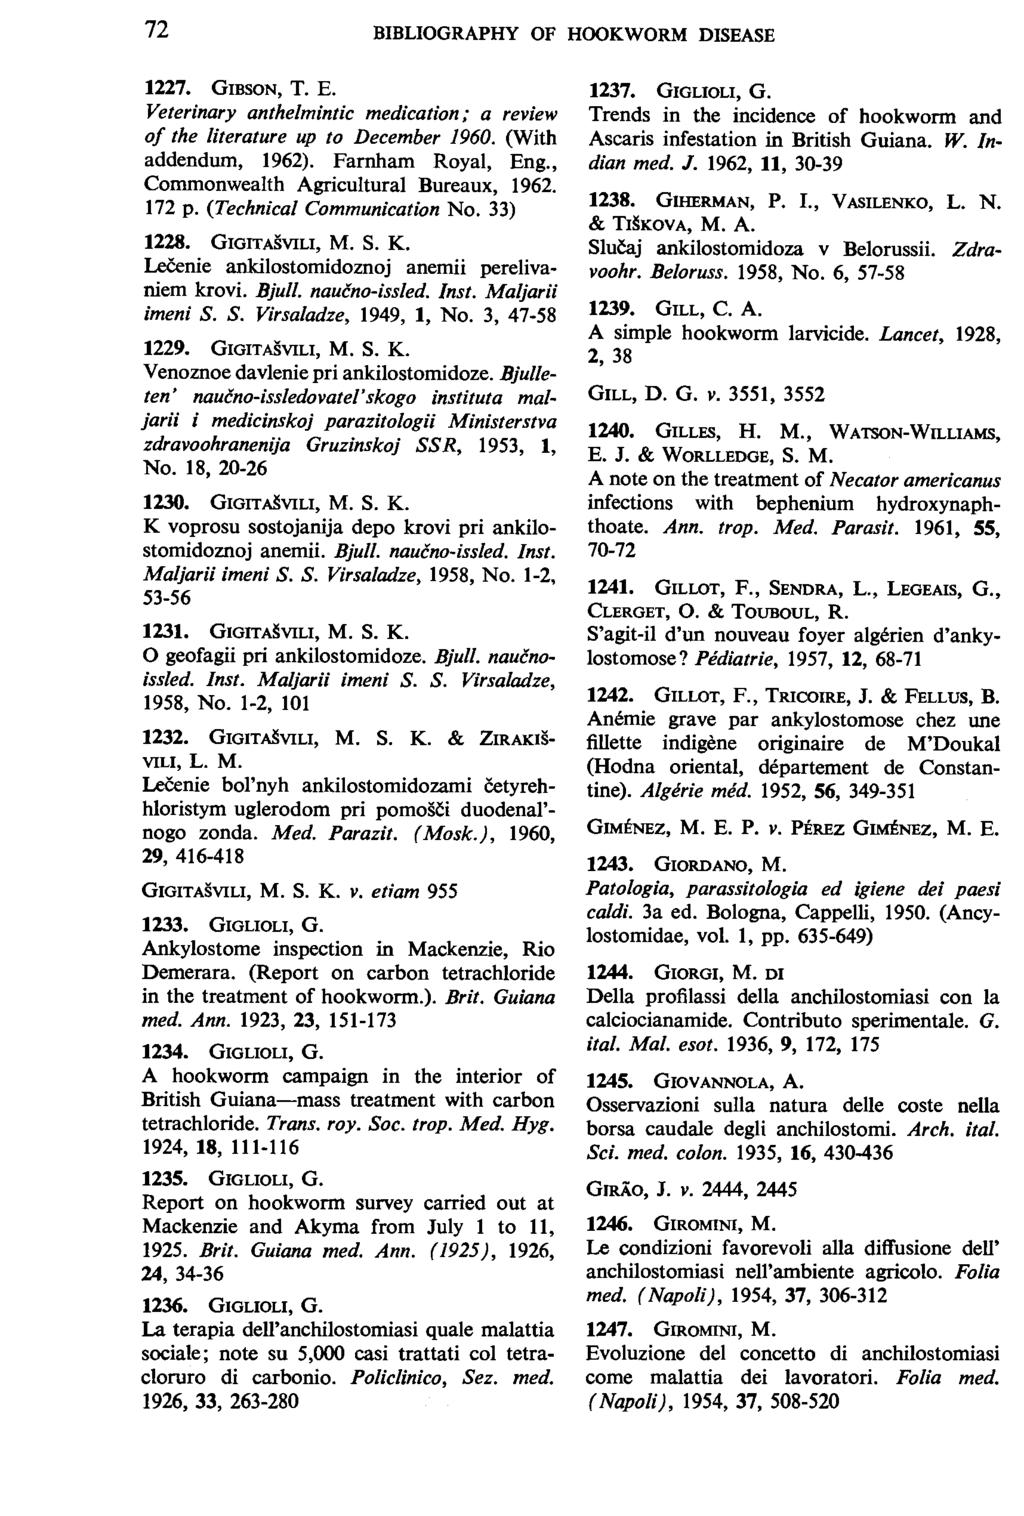 72 BIBLIOGRAPHY OF HOOKWORM DISEASE 1227. GIBSON, T. E. Veterinary anthelmintic medication; a review of the literature up to December 1960. (With addendum, 1962). Farnham Royal, Eng.